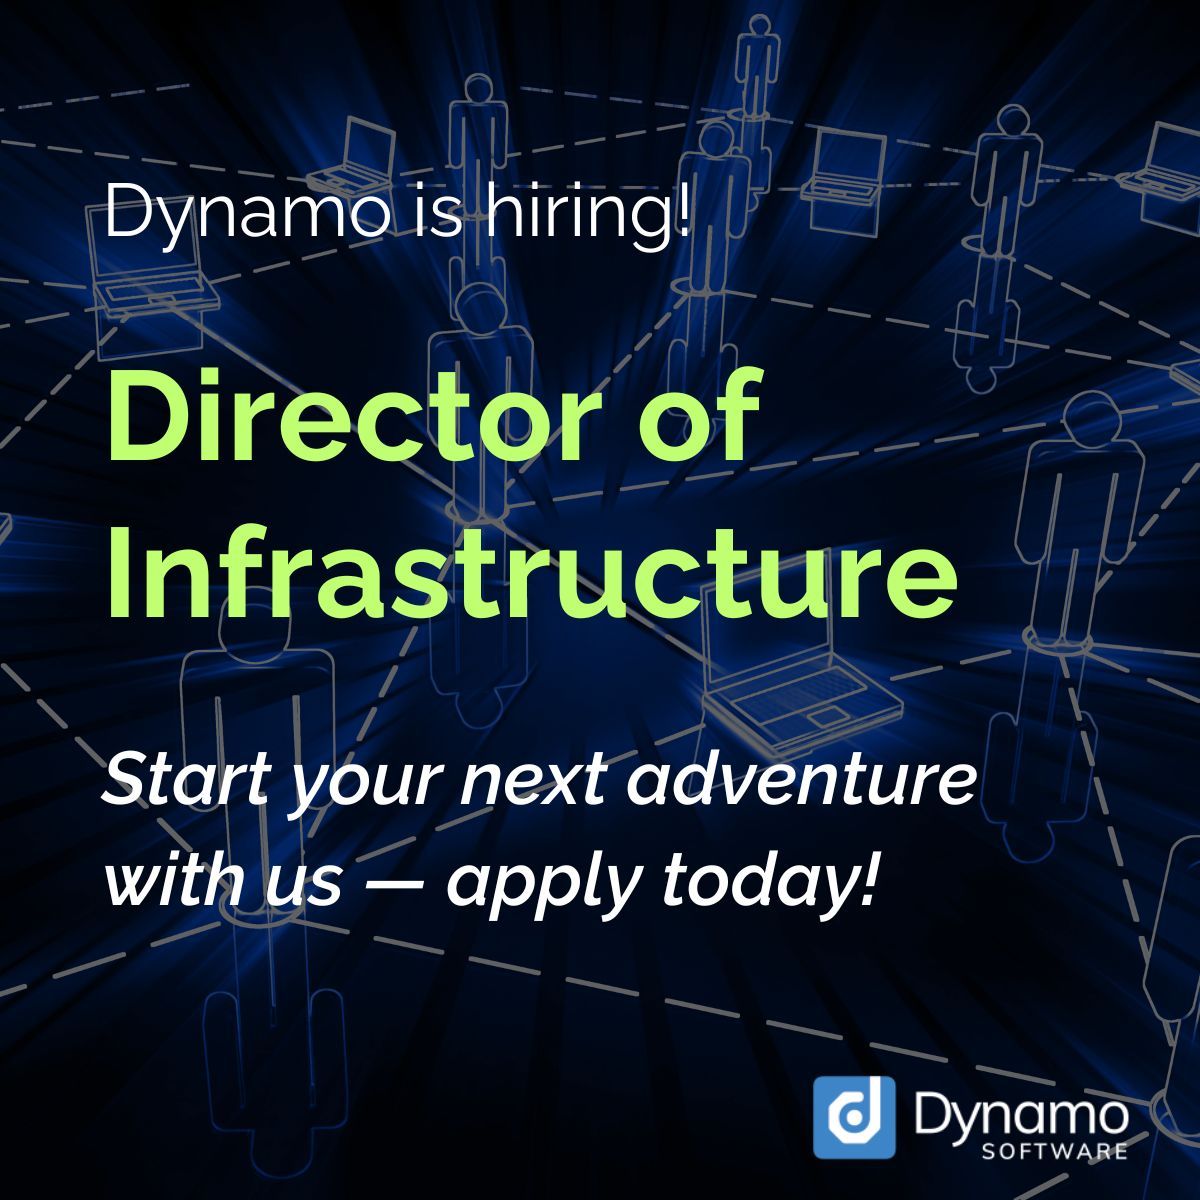 We’re hiring!

Do you know a proven and dedicated leader ready to join a team of #FinTech innovators as the Director of Infrastructure? 

Learn more or apply for this position here: buff.ly/3Rw772V

#Dynamo #TeamDynamo #Careers #Director #NetworkServices